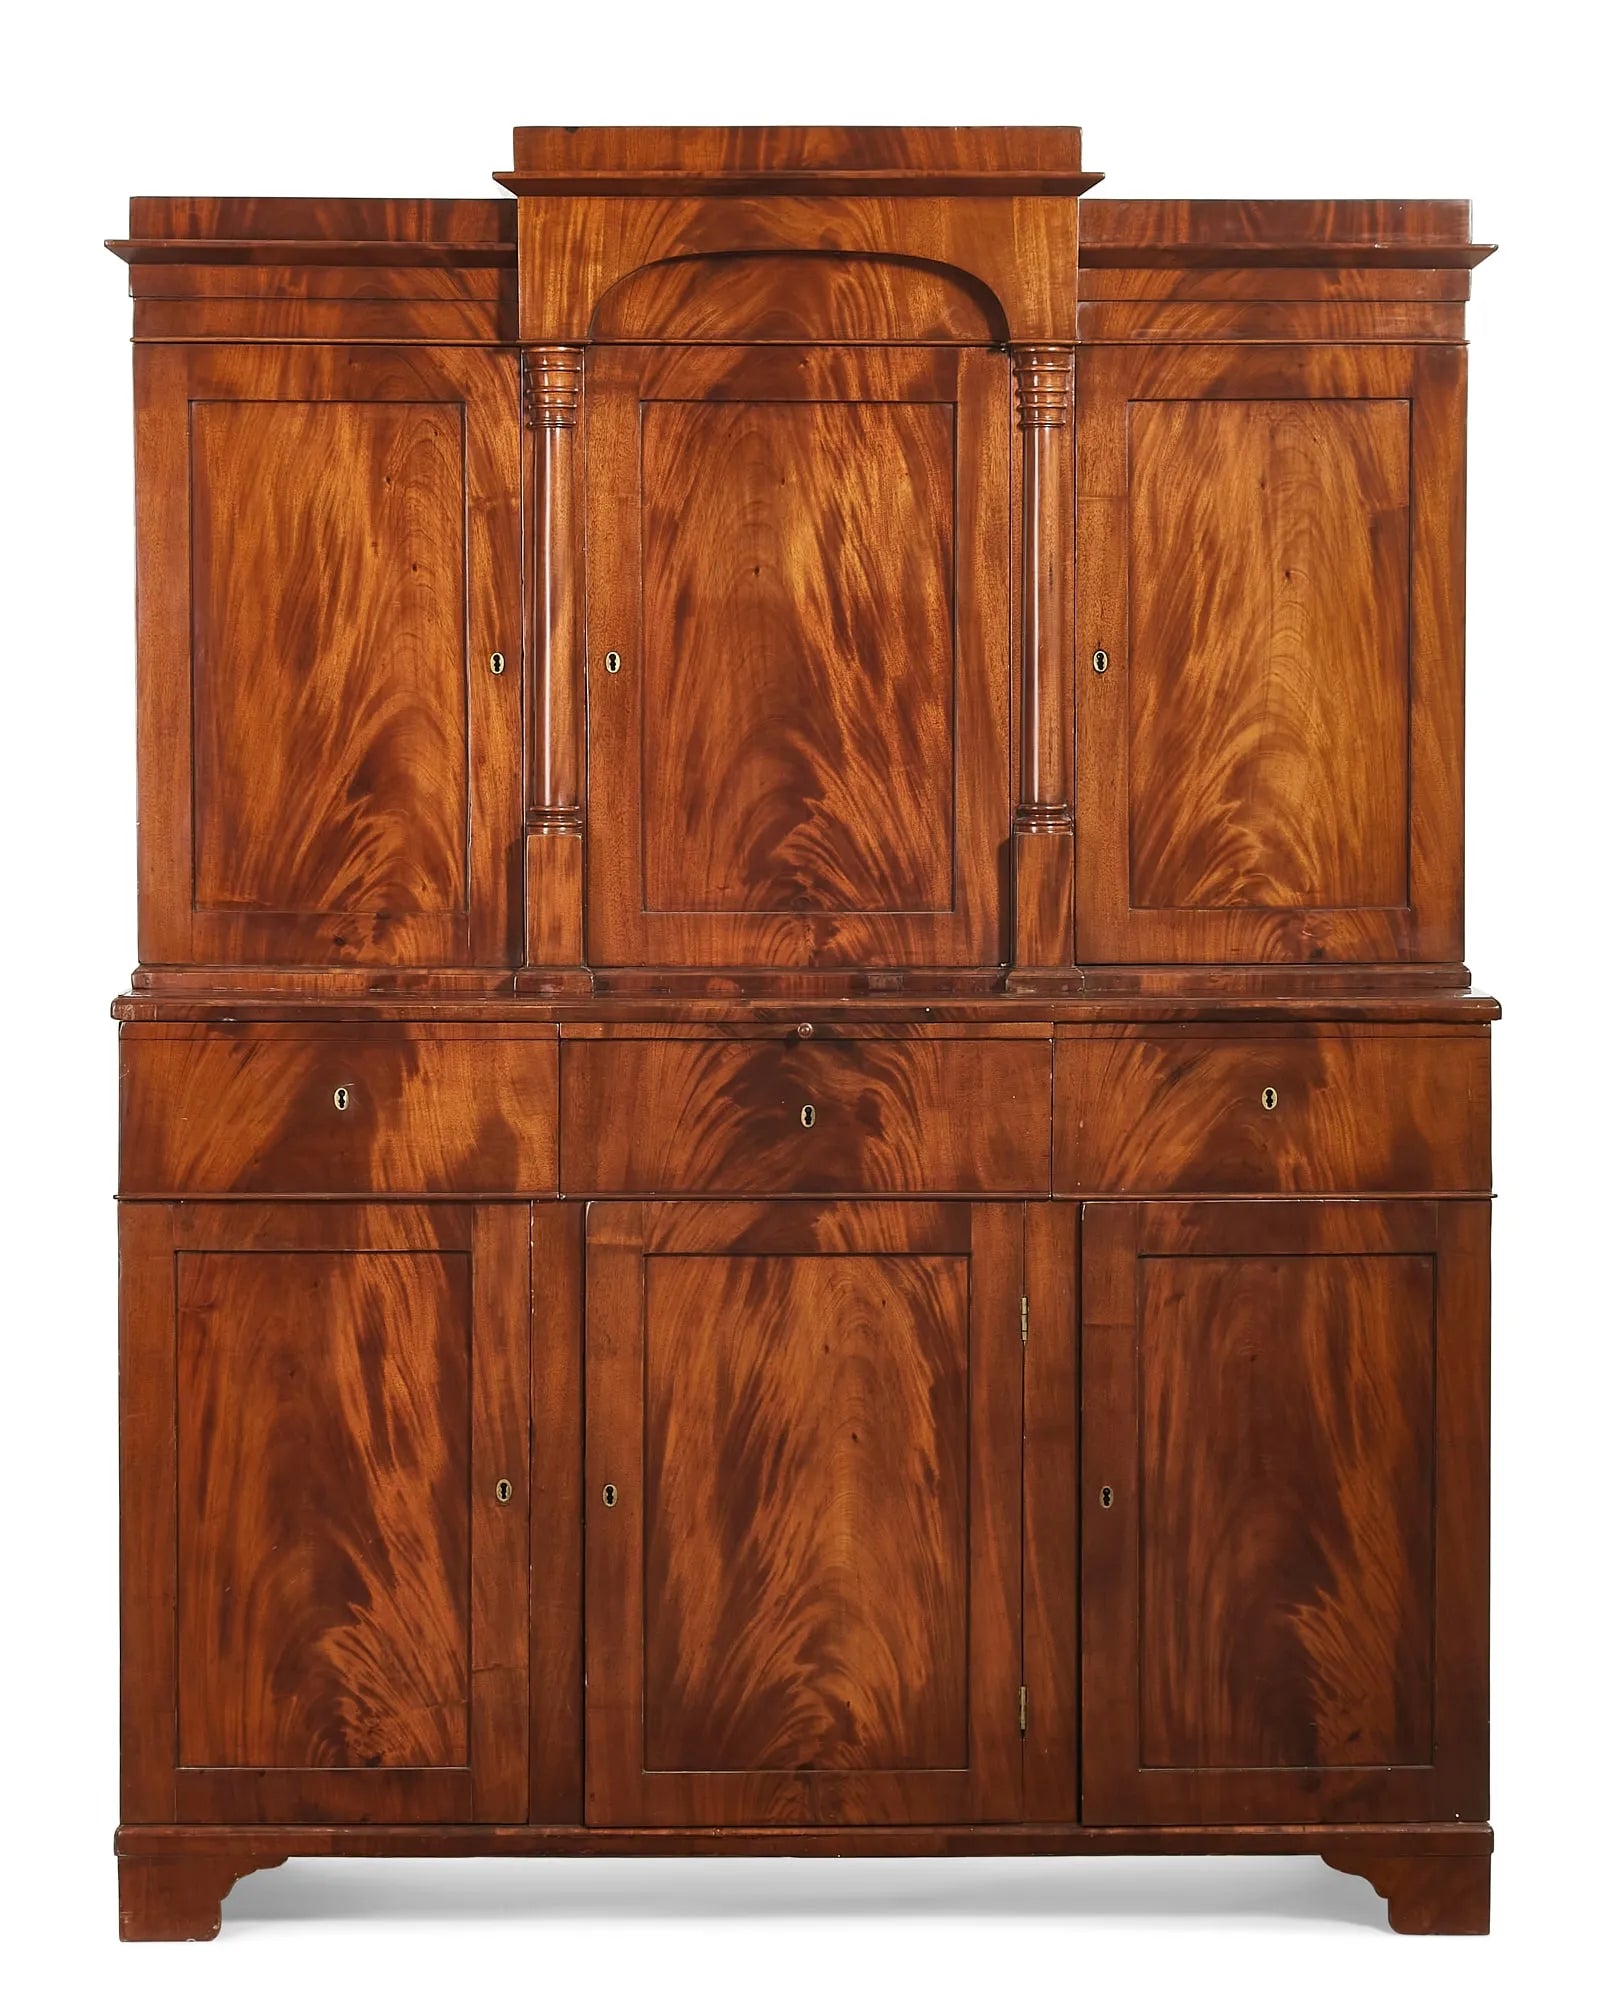 AF3-004: ANTIQUE EARLY 19TH CENTURY ENGLISH REGENCY ROSEWOOD CONSOLE CABINET W/ GILT METAL MOUNTS